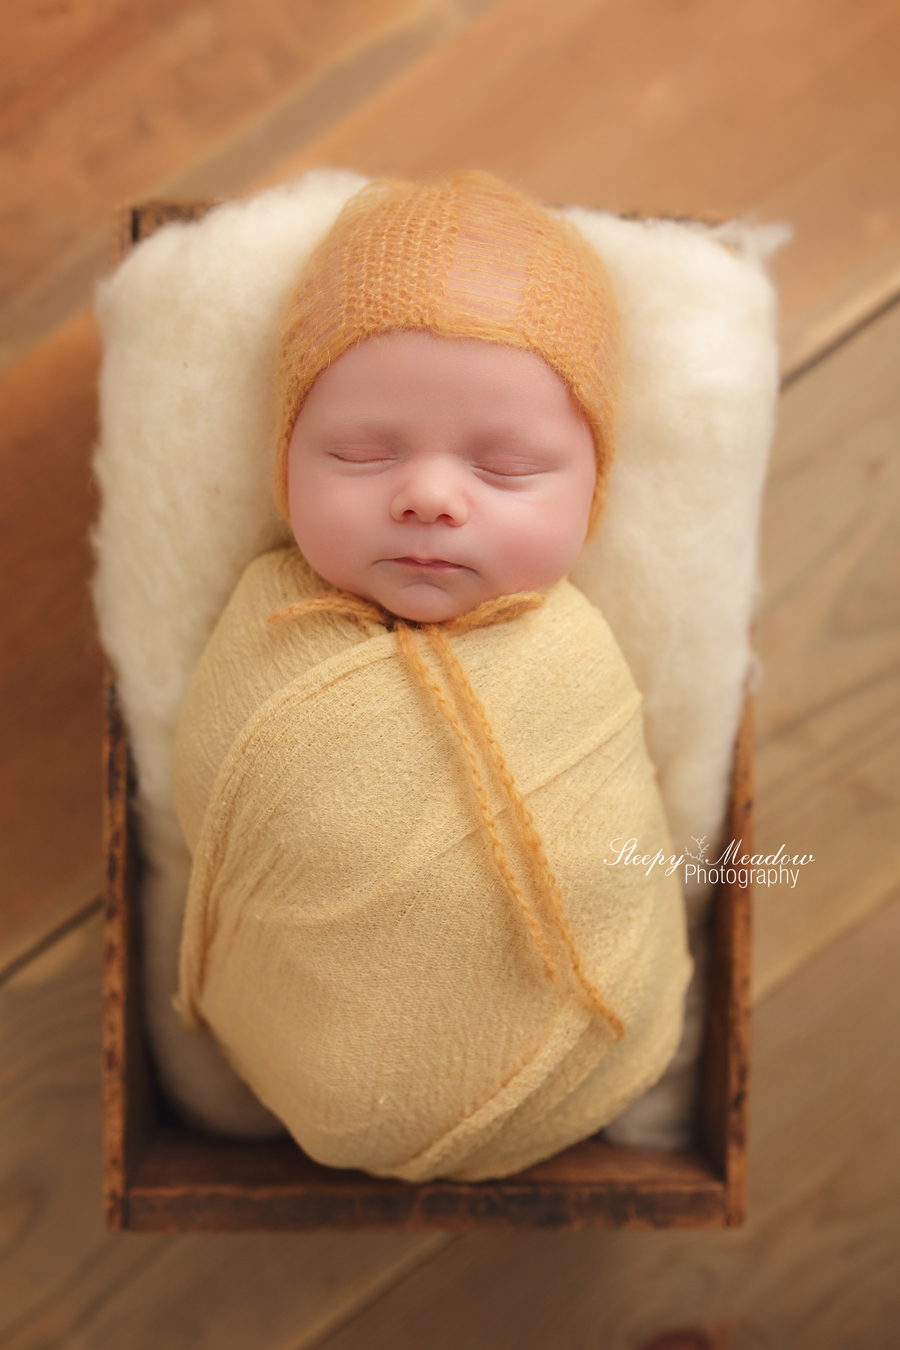 Baby sleeping in crate for newborn pictures in Milwaukee by Sleepy Meadow Photography